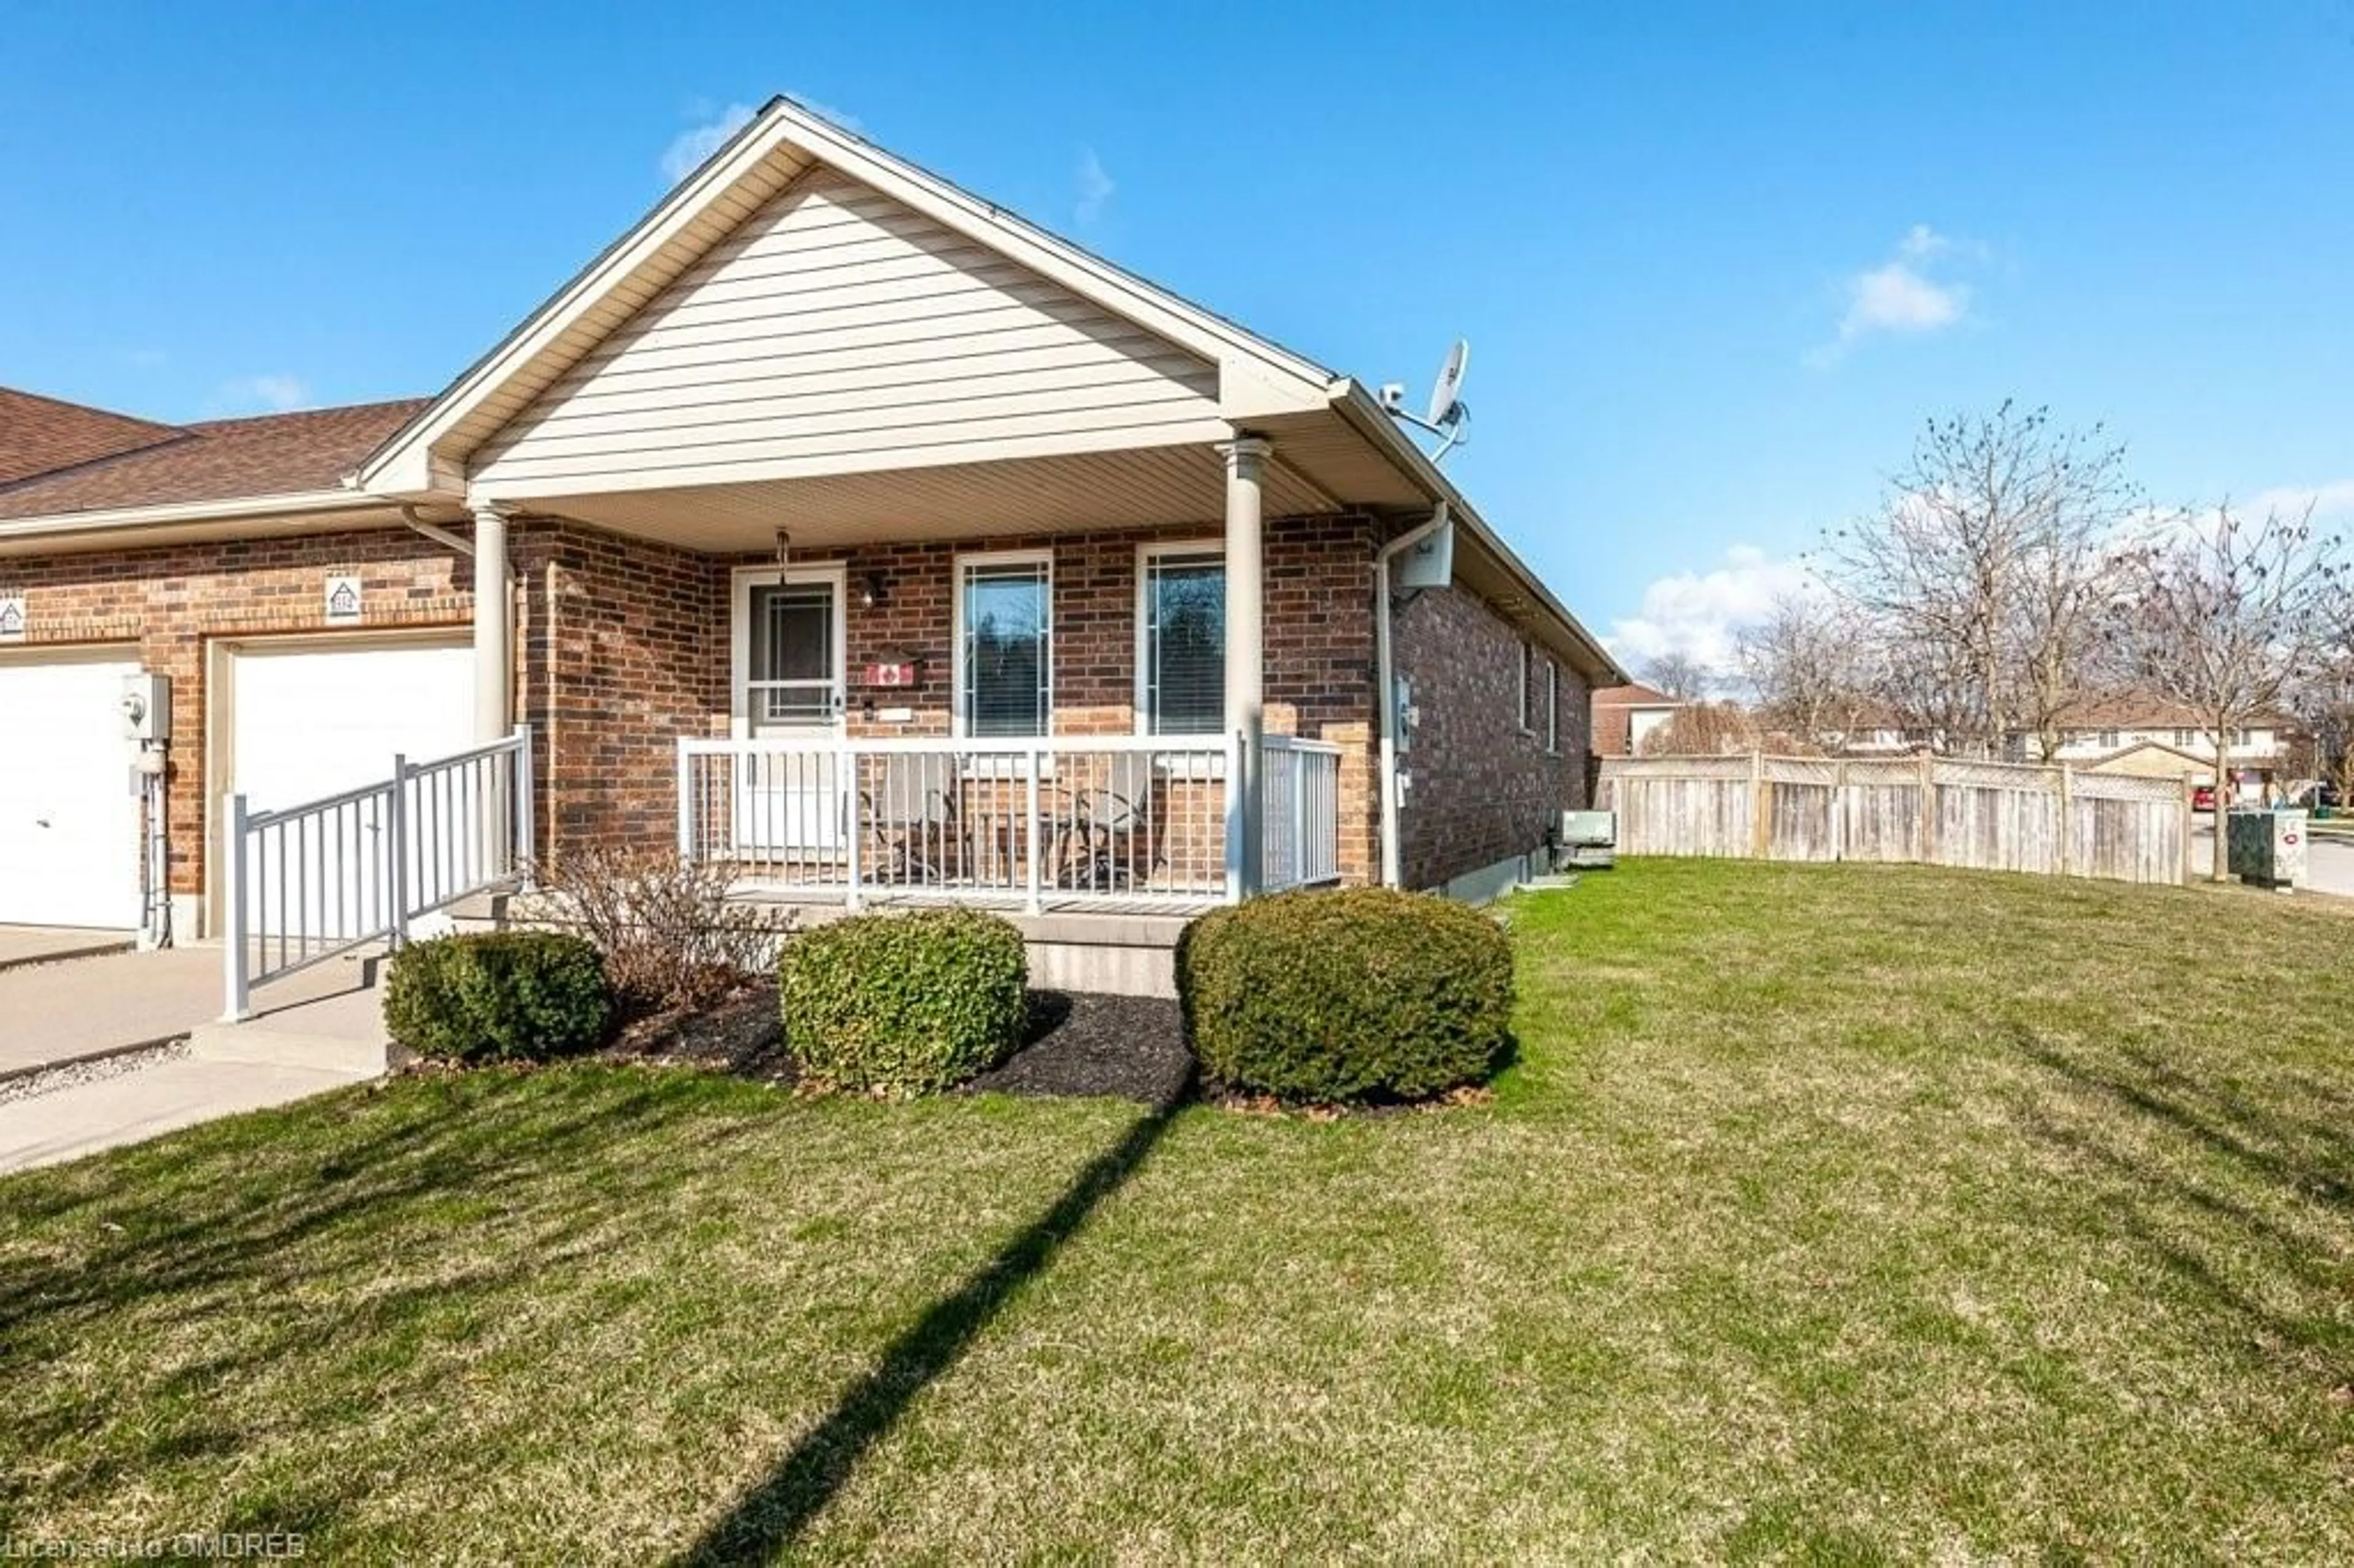 Frontside or backside of a home for 334 Dufferin St, Stratford Ontario N5A 8B3